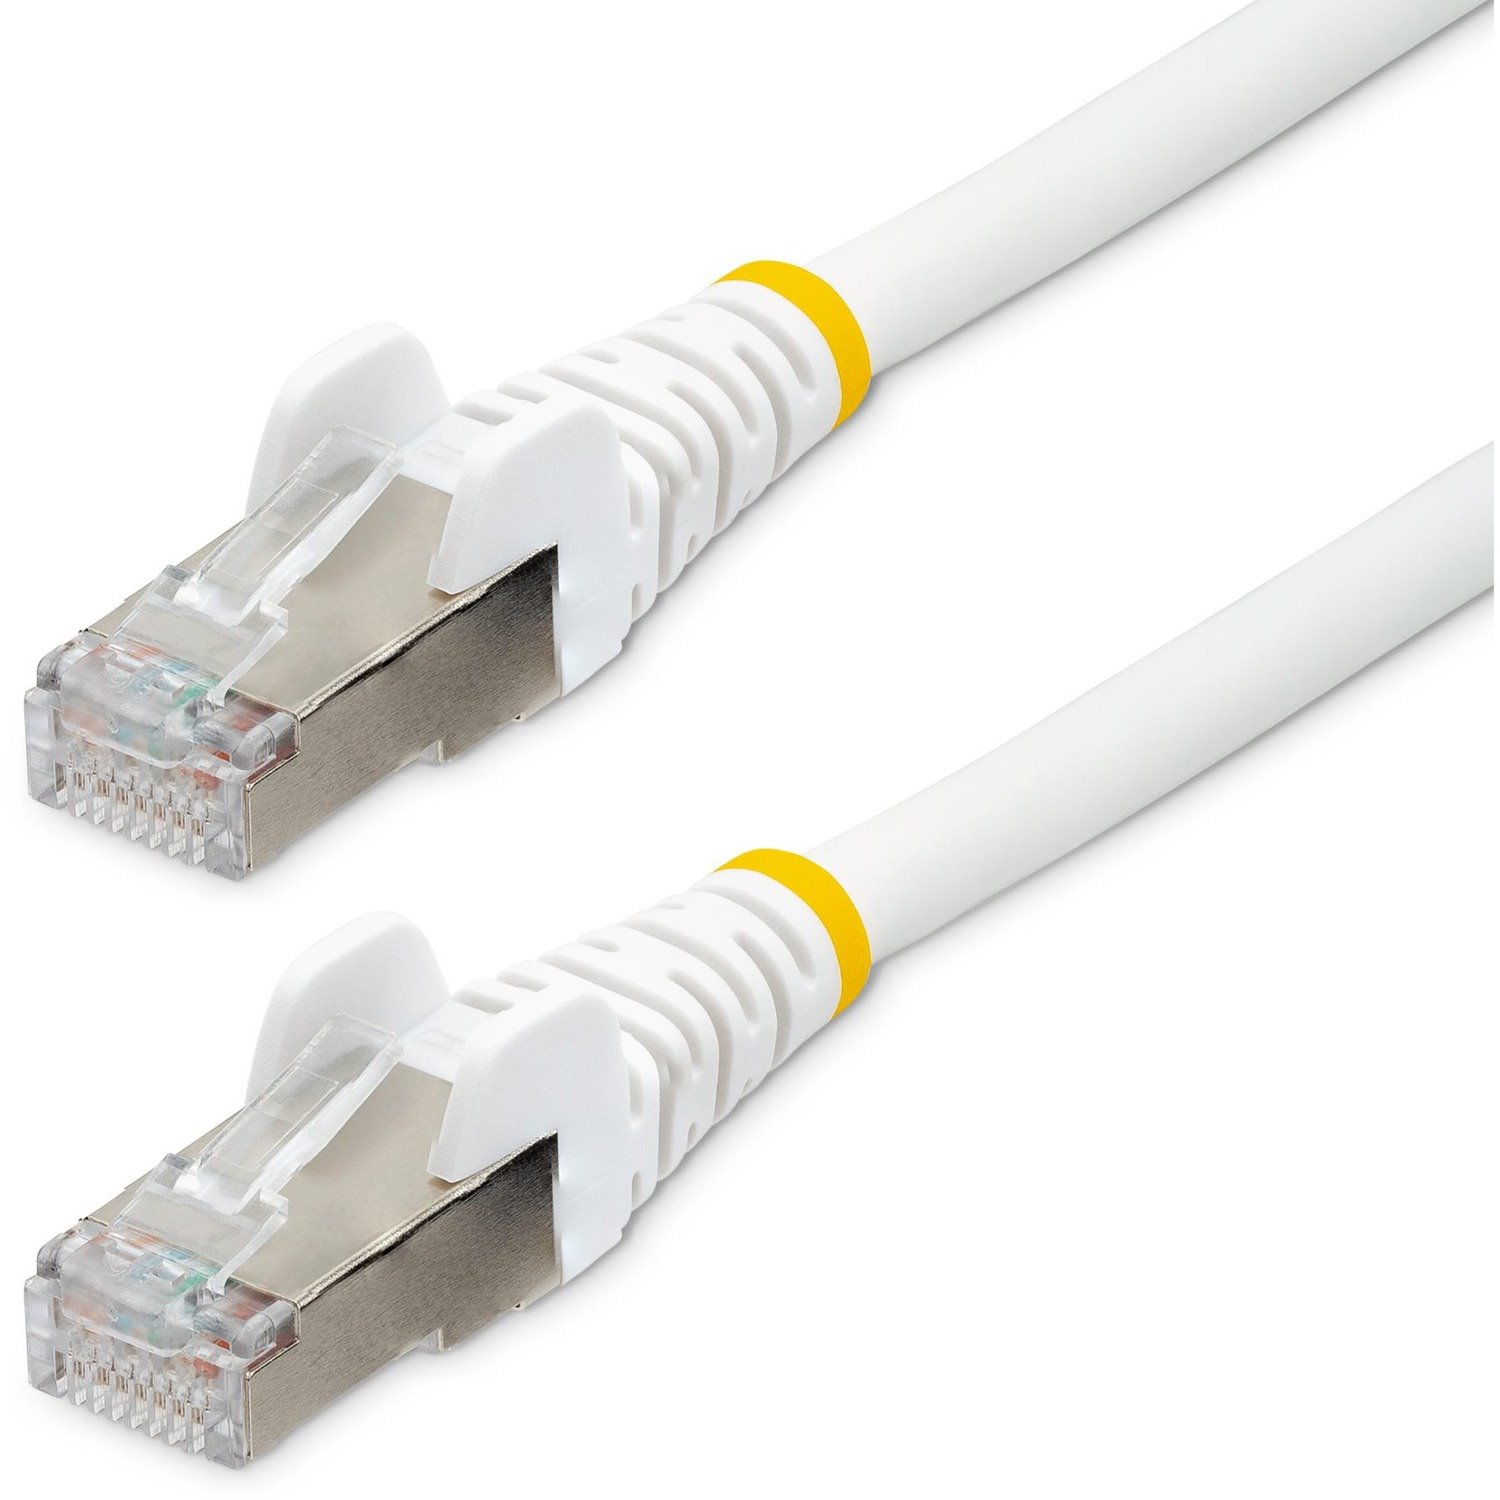 StarTech.com 5m CAT6a Ethernet Cable, White Low Smoke Zero Halogen (LSZH) 10 GbE 100W PoE S/FTP Snagless RJ-45 Network Patch Cord